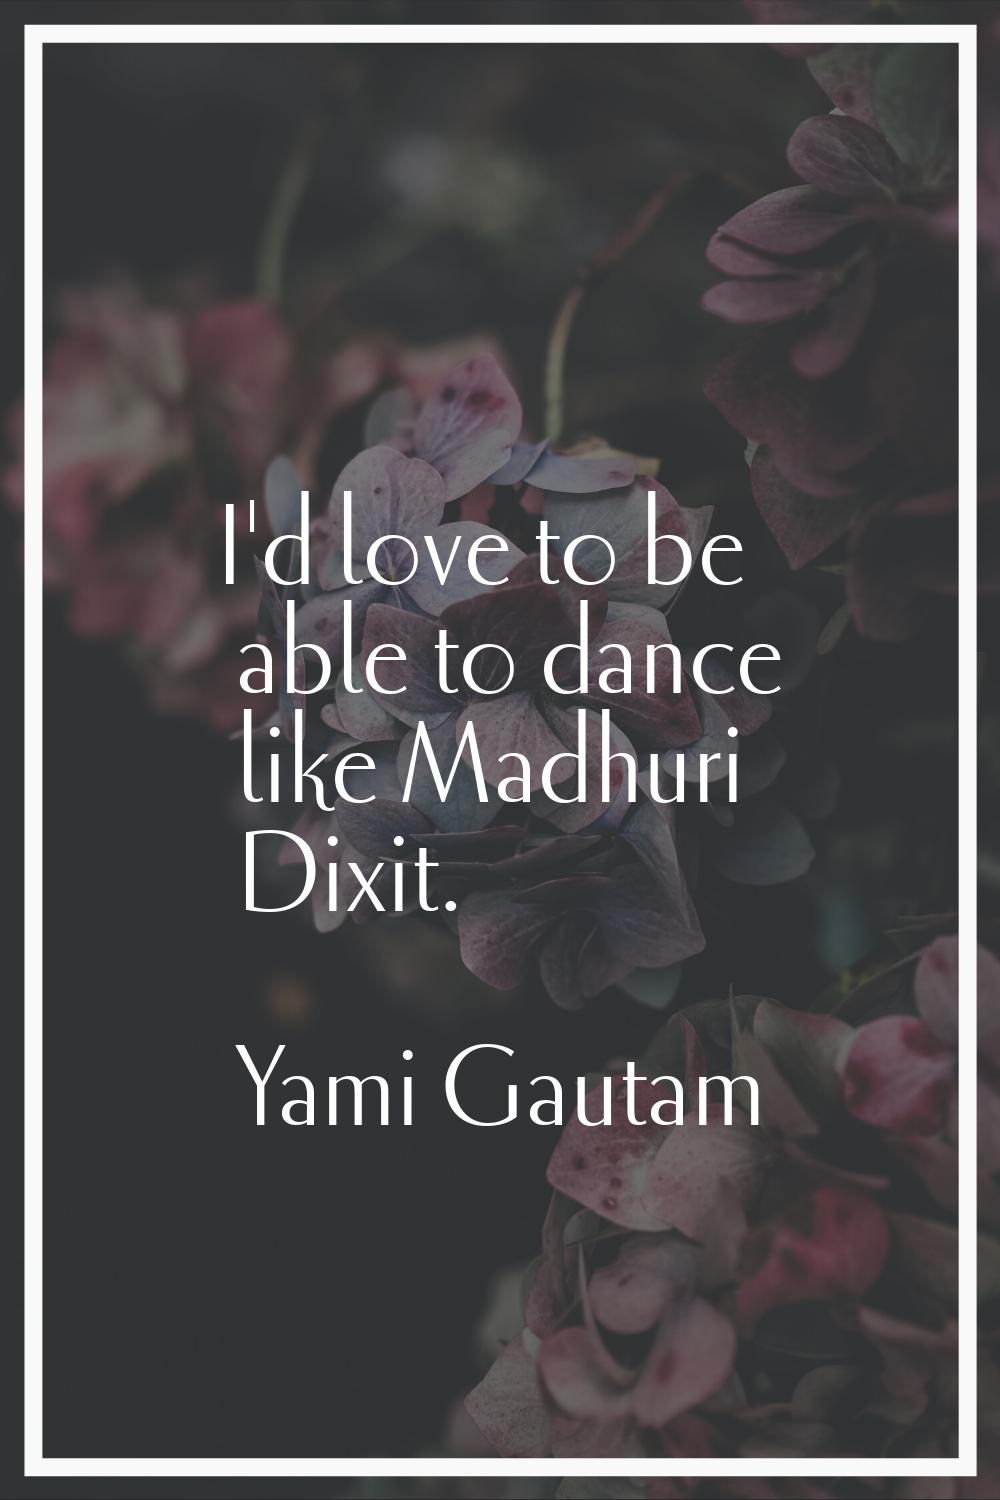 I'd love to be able to dance like Madhuri Dixit.